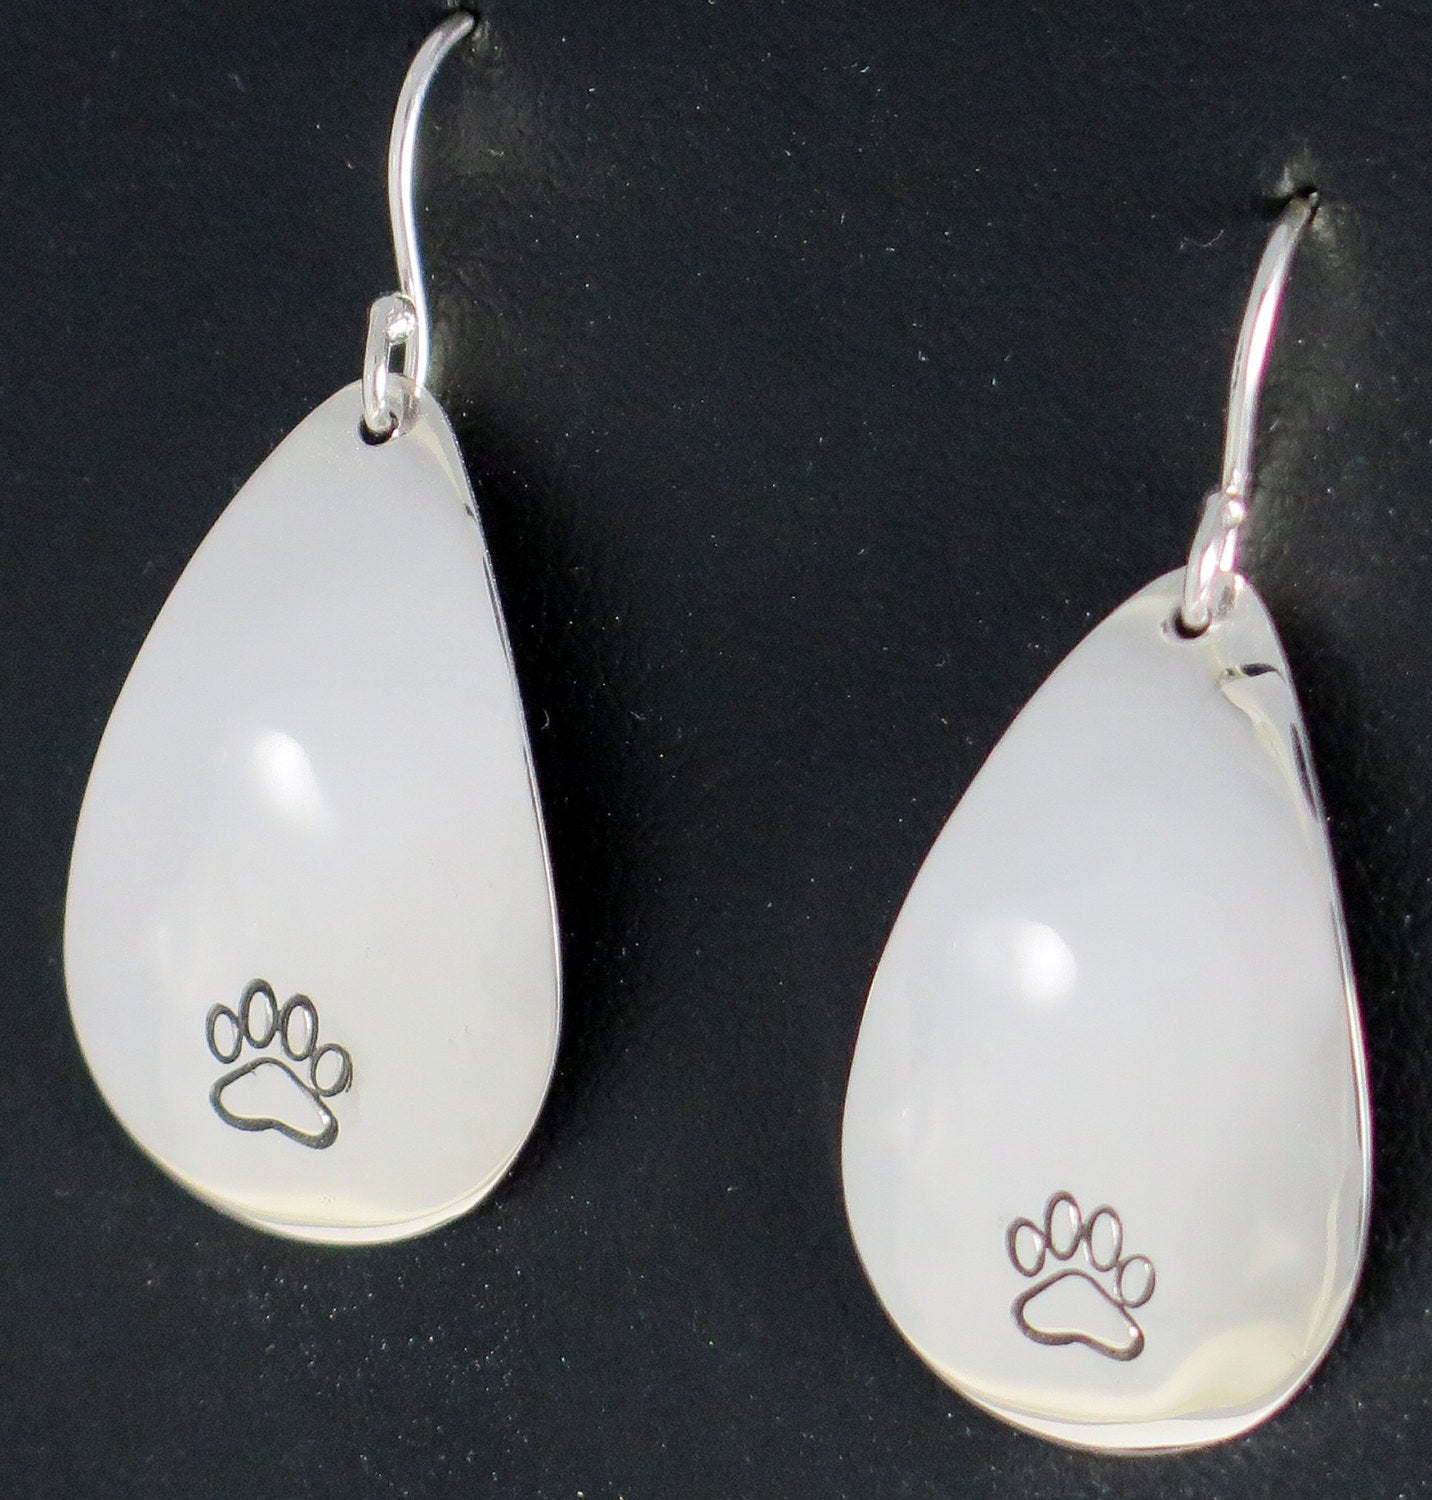 Dog cat paw animal lover Sterling Silver tear drop earrings hand stamped paw birthday holiday gift